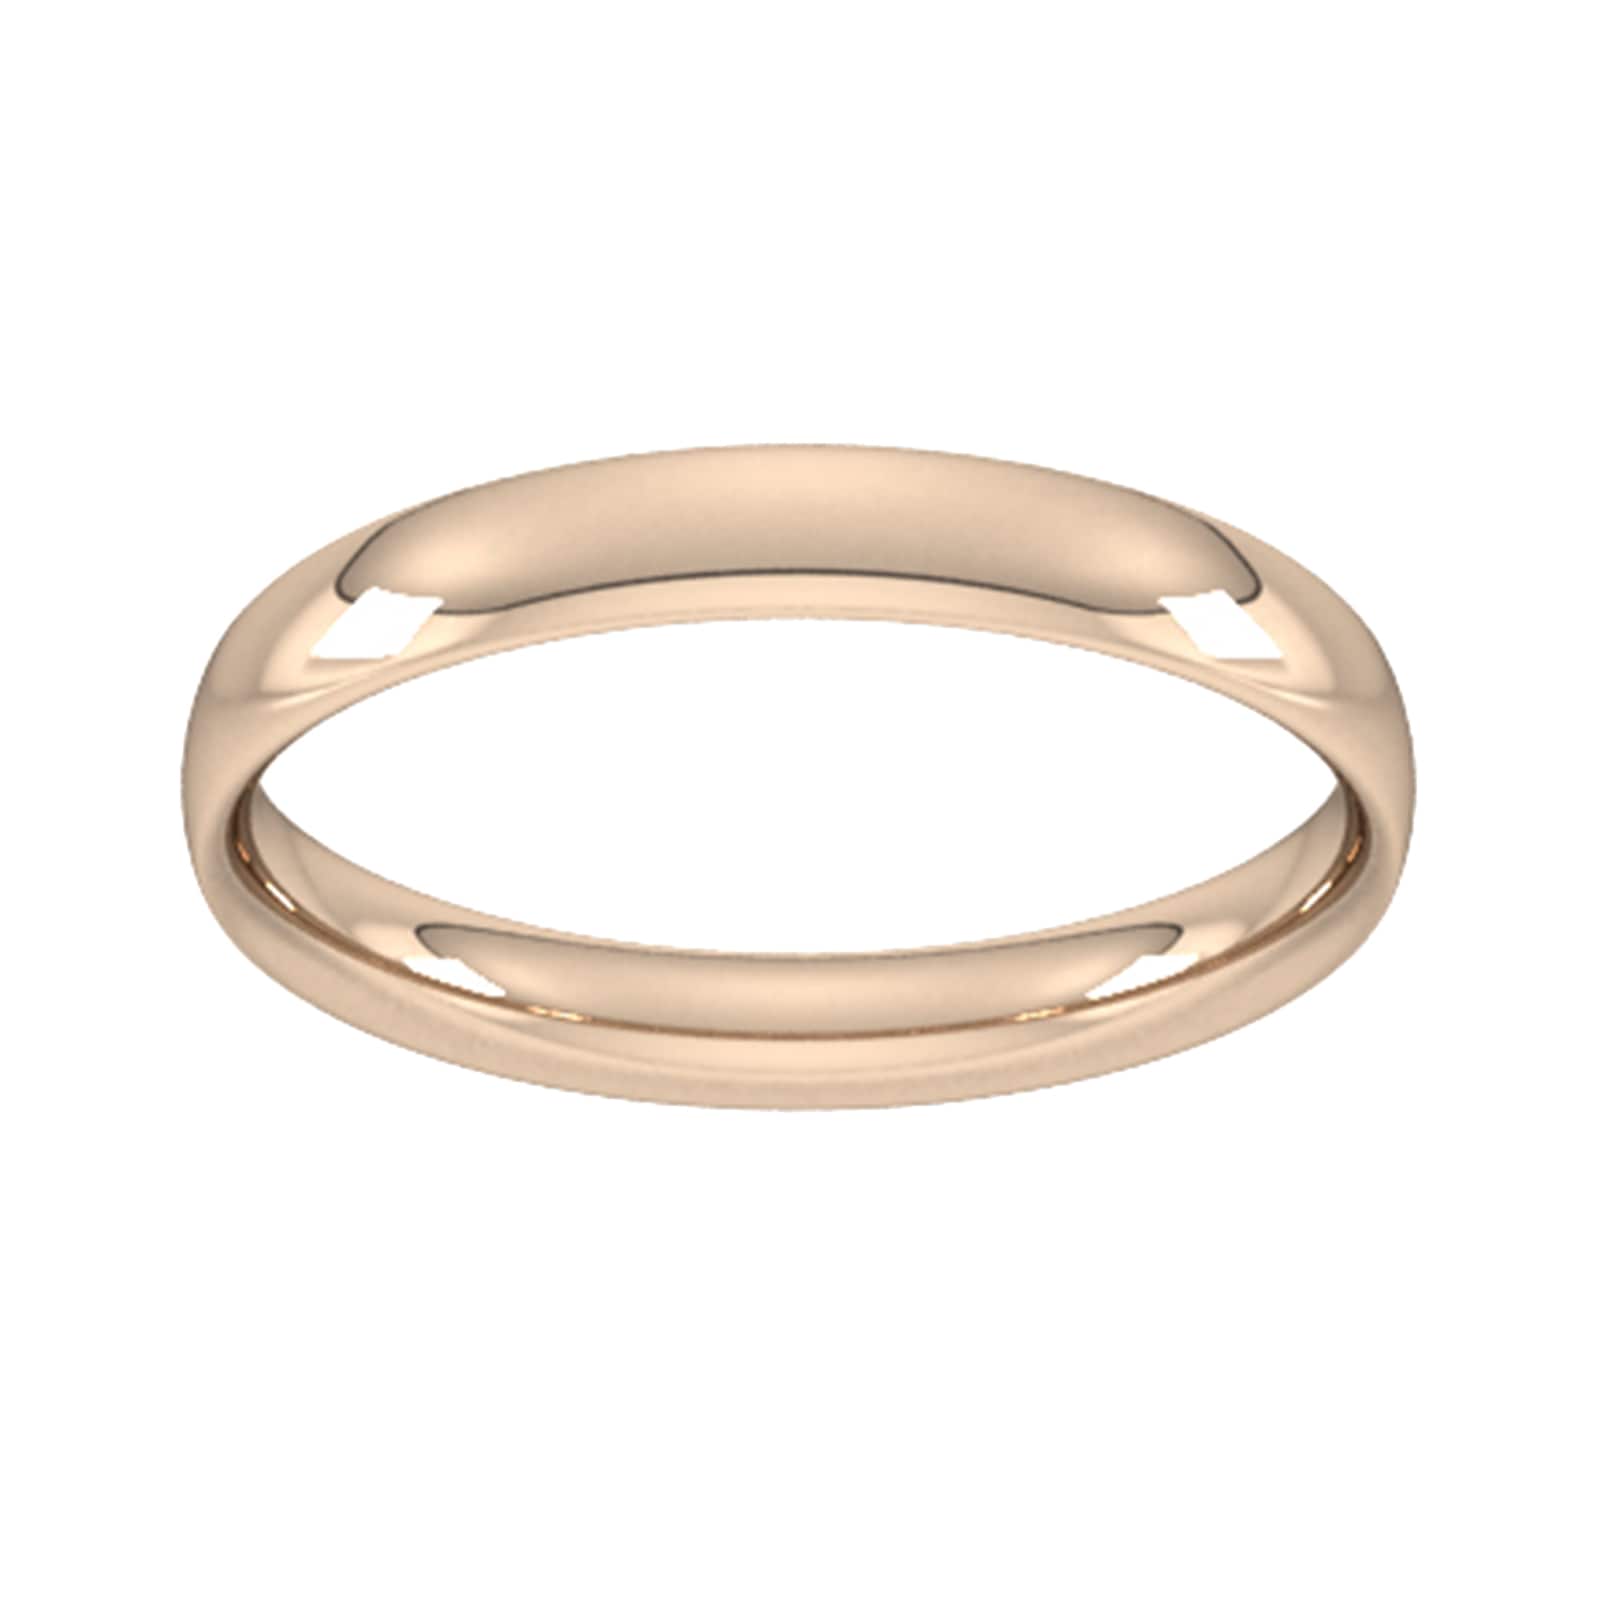 4mm Traditional Court Standard Wedding Ring In 9 Carat Rose Gold - Ring Size T